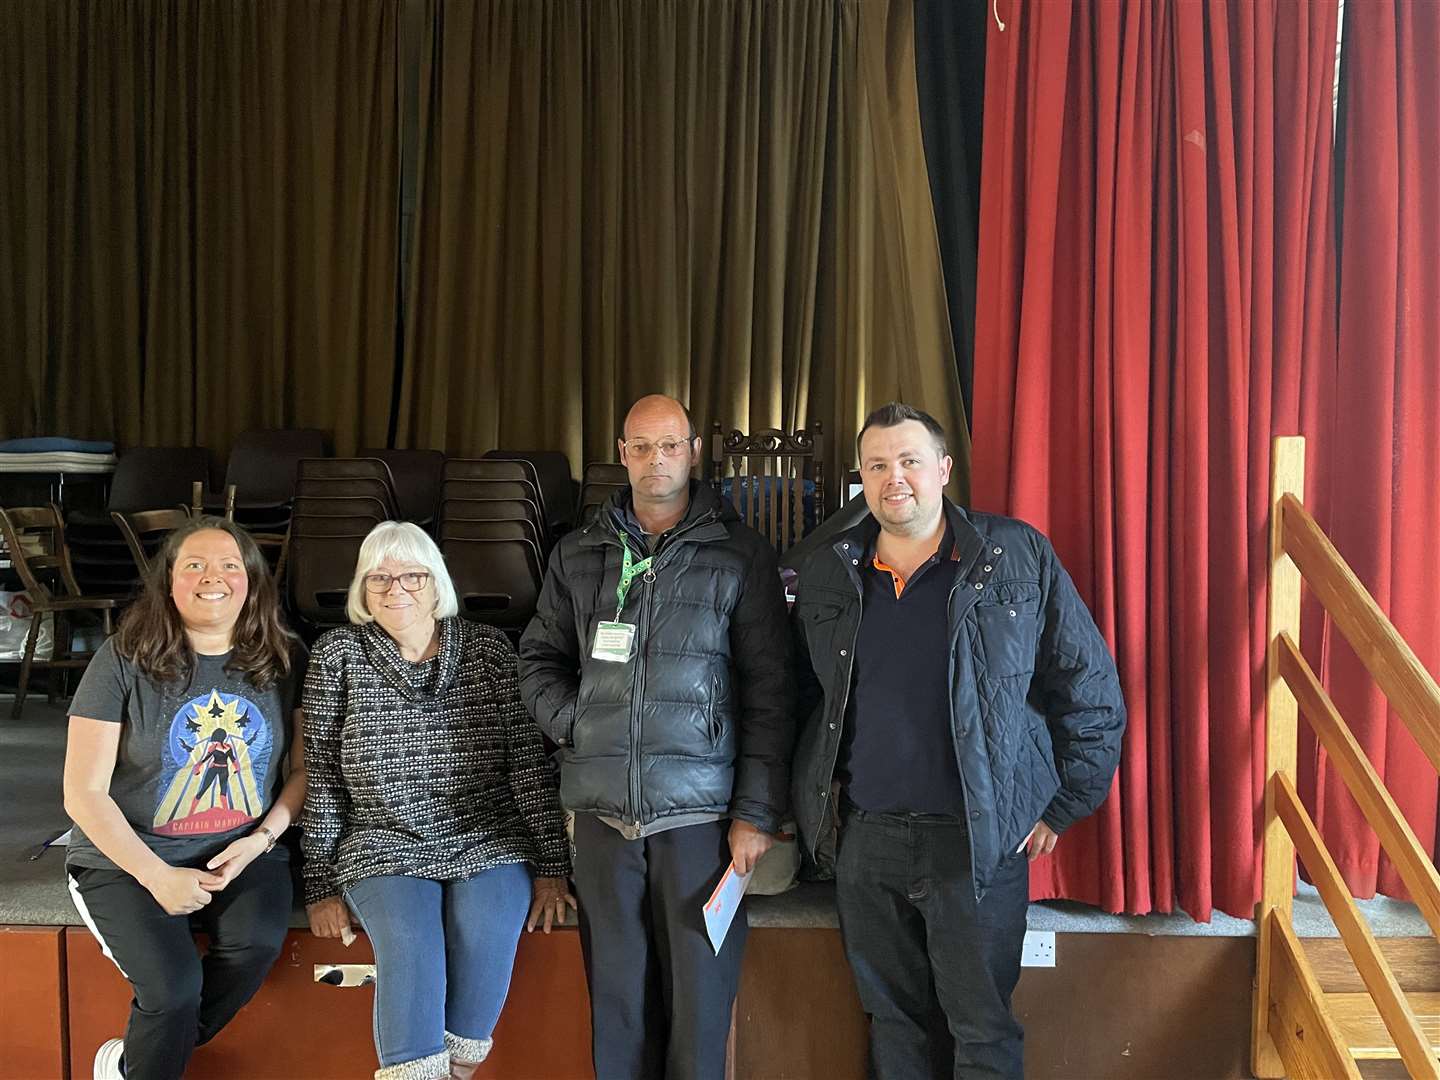 A large group of people have led the effort to support those left homeless by yesterday's blast, including (L-R) Emma Ellis-Nash, Jacque Anderson, Nigel Dalby and Ben Farnham